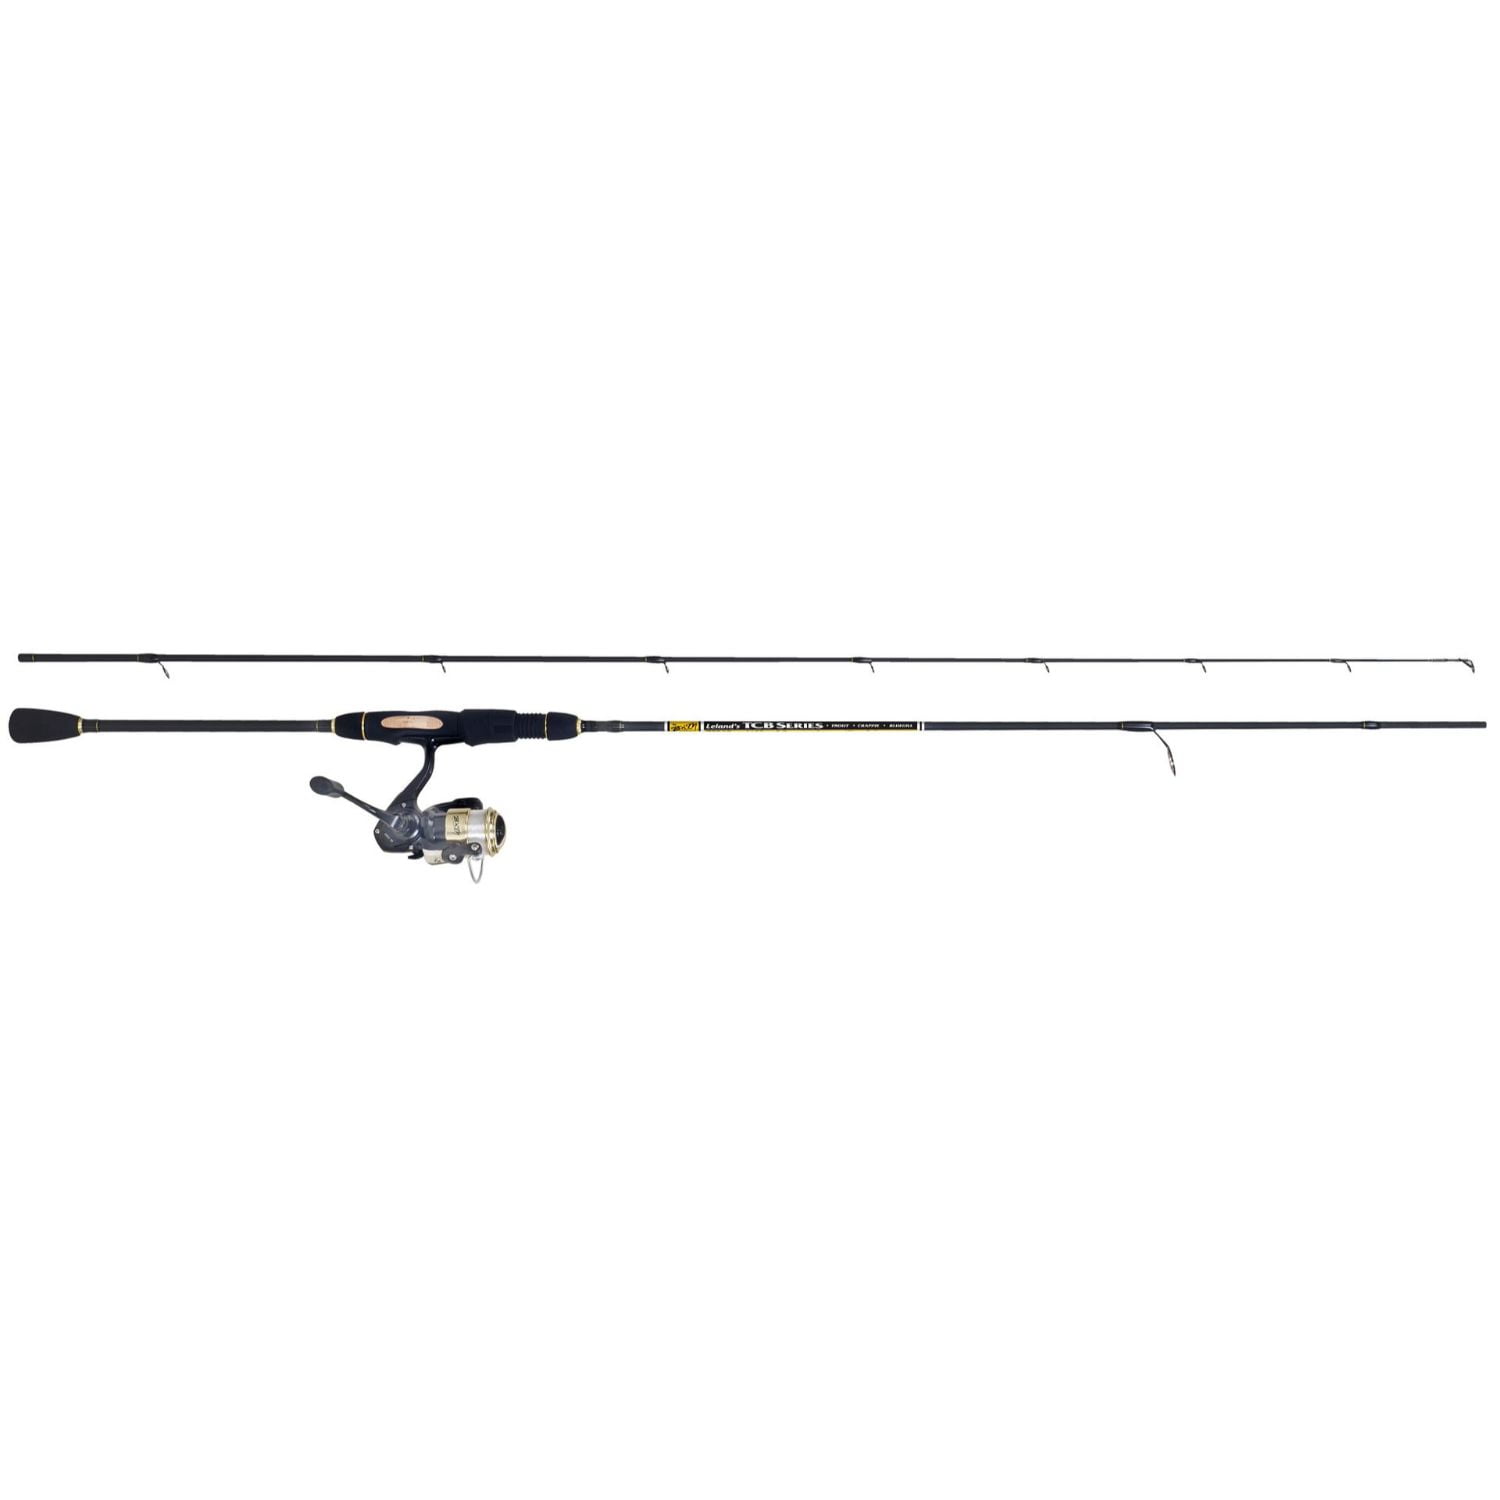 Bass Trout 2-piece Fishing Rod Fire Stik Lite Spinning Rod Crappie 